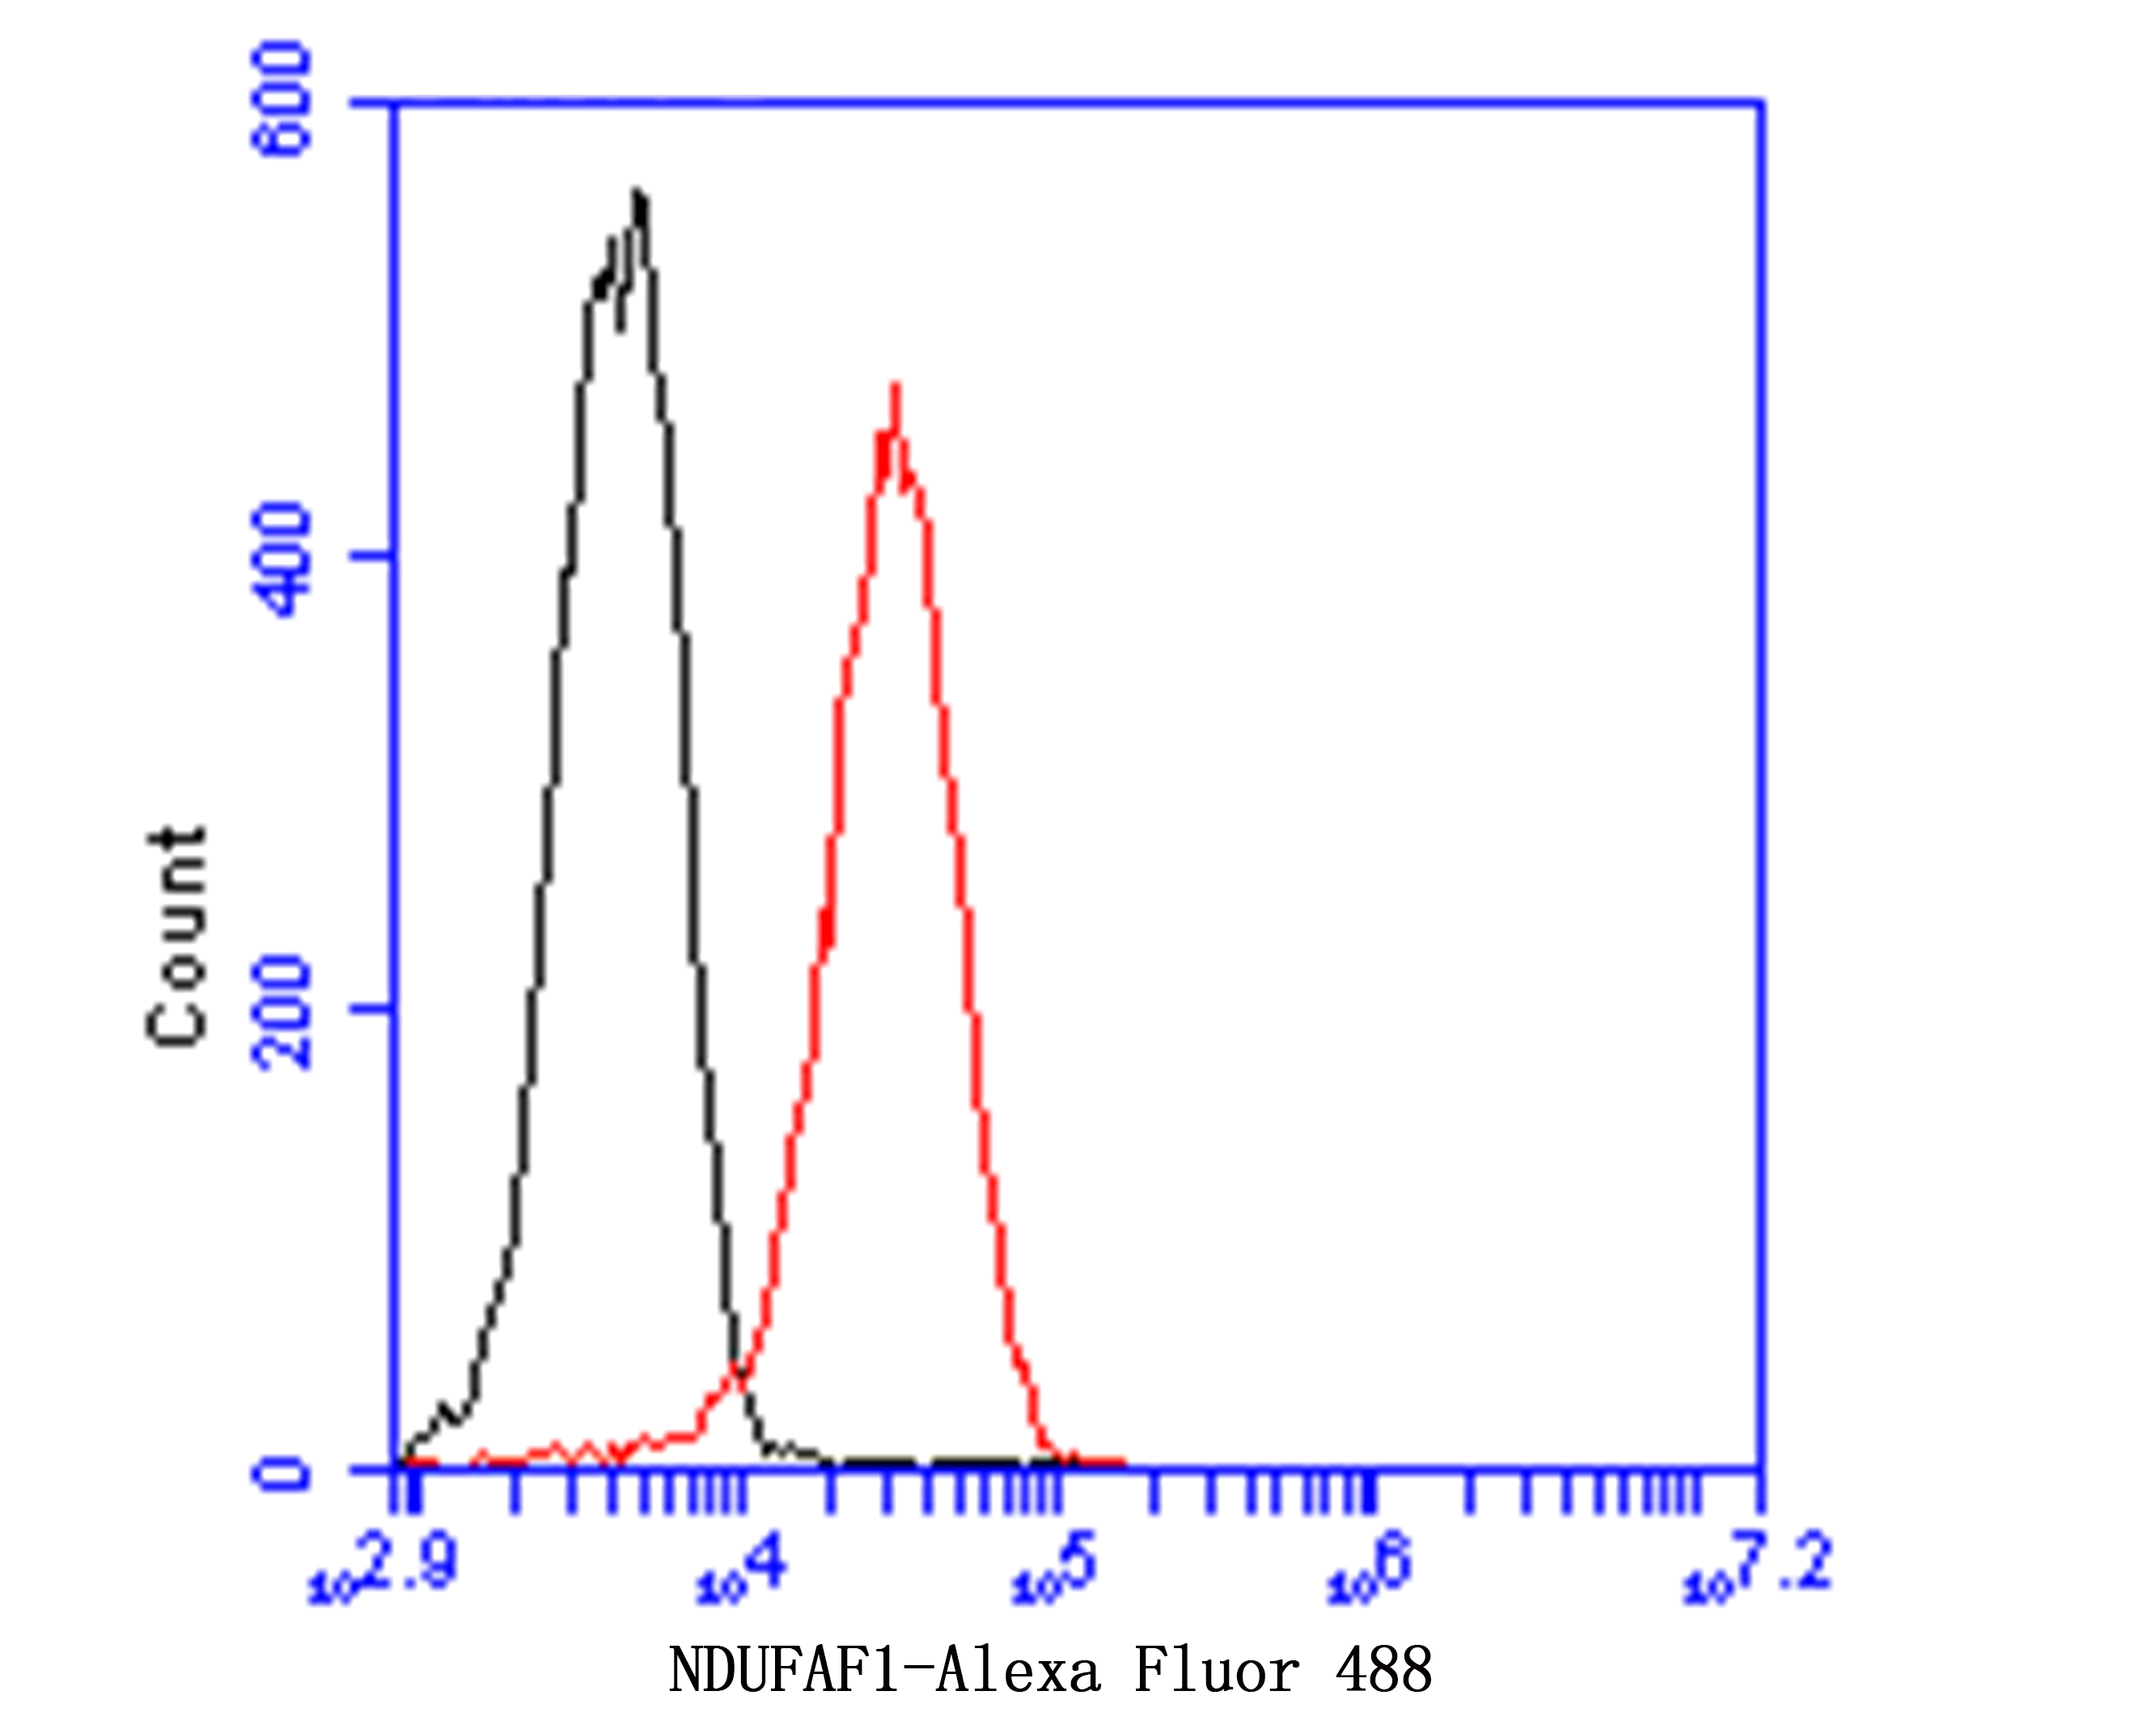 Flow cytometric analysis of NDUFAF1 was done on THP-1 cells. The cells were fixed, permeabilized and stained with NDUFAF1 antibody at 1/100 dilution (red) compared with an unlabelled control (cells without incubation with primary antibody; black). After incubation of the primary antibody on room temperature for an hour, the cells was stained with a Alexa Fluor™ 488-conjugated goat anti-rabbit IgG Secondary antibody at 1/500 dilution for 30 minutes.